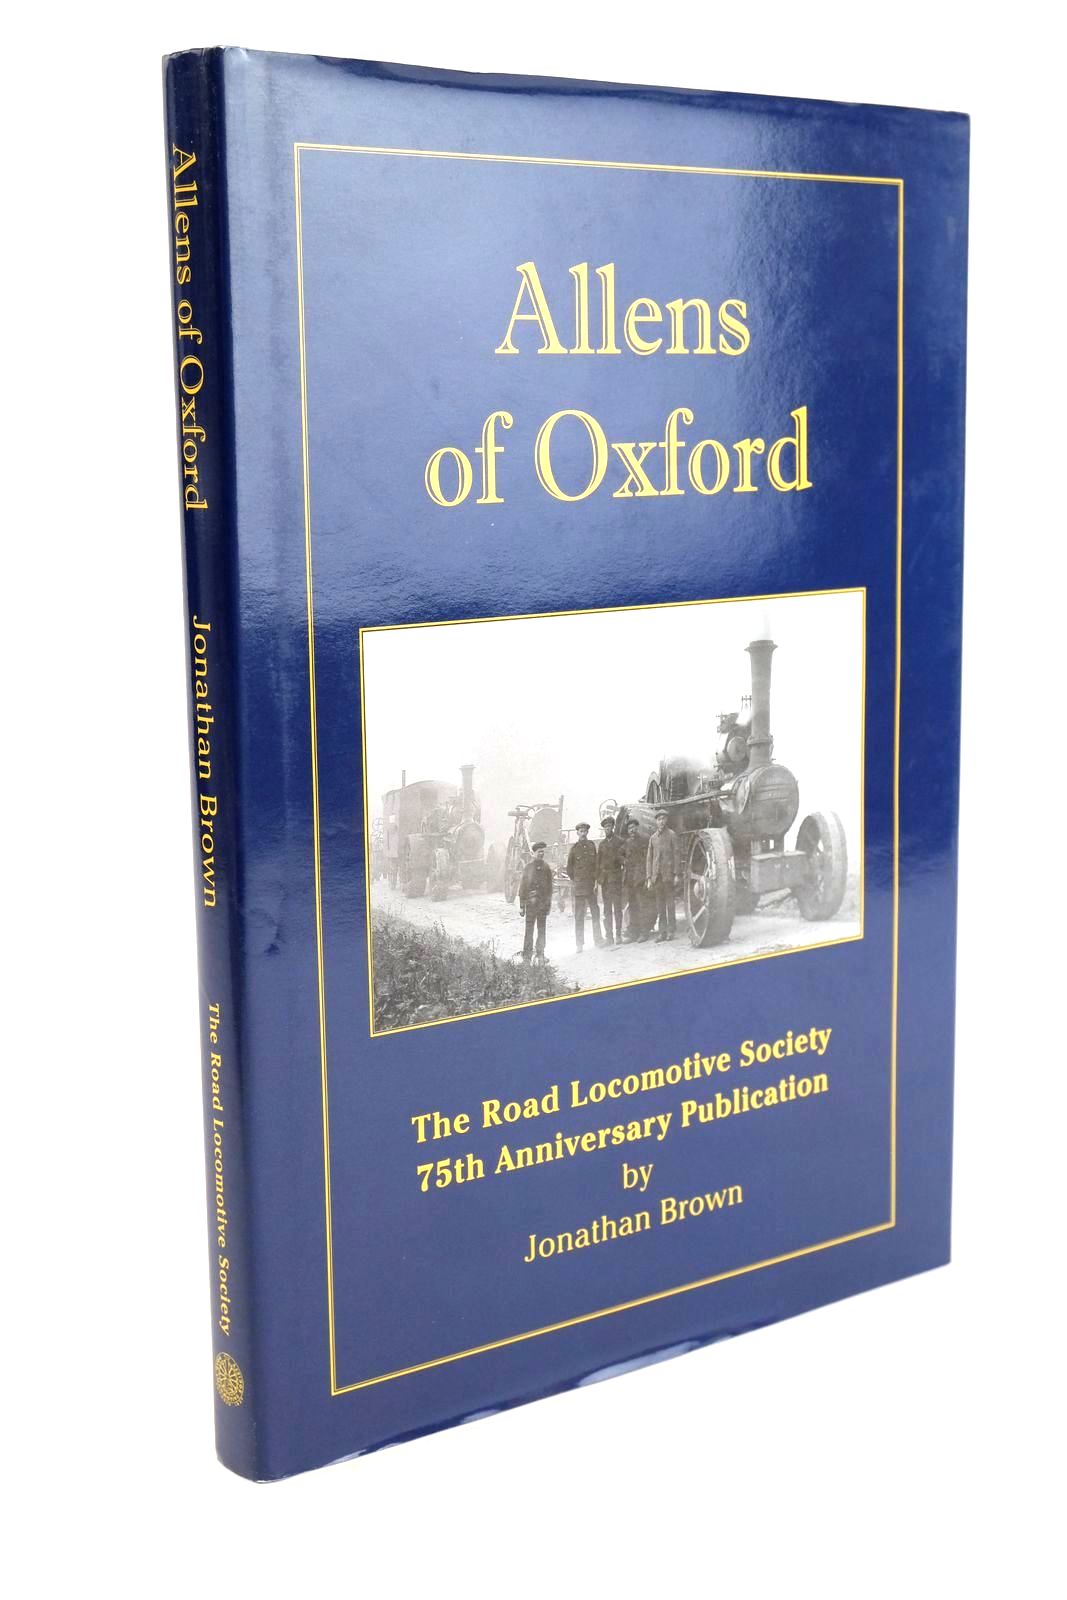 Photo of ALLENS OF OXFORD written by Brown, Jonathan published by The Road Locomotive Society (STOCK CODE: 1324092)  for sale by Stella & Rose's Books